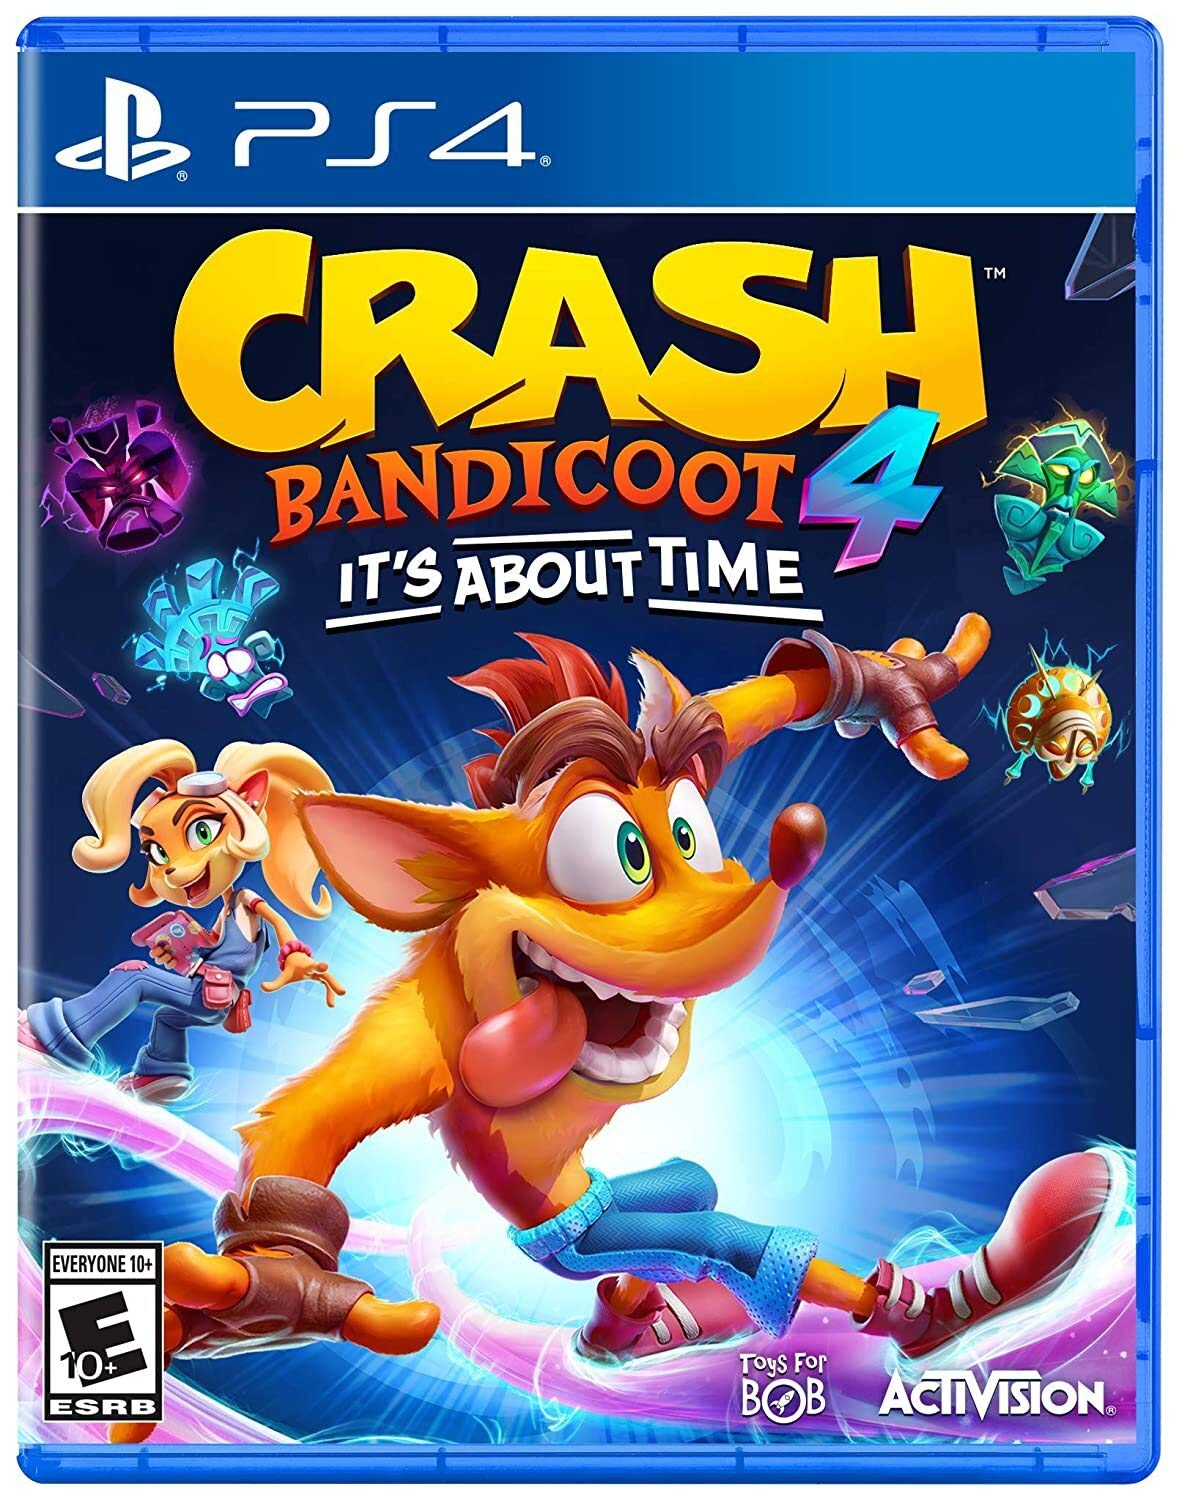 state of play announcements - Crash Bandicoot 4: It's About Time's